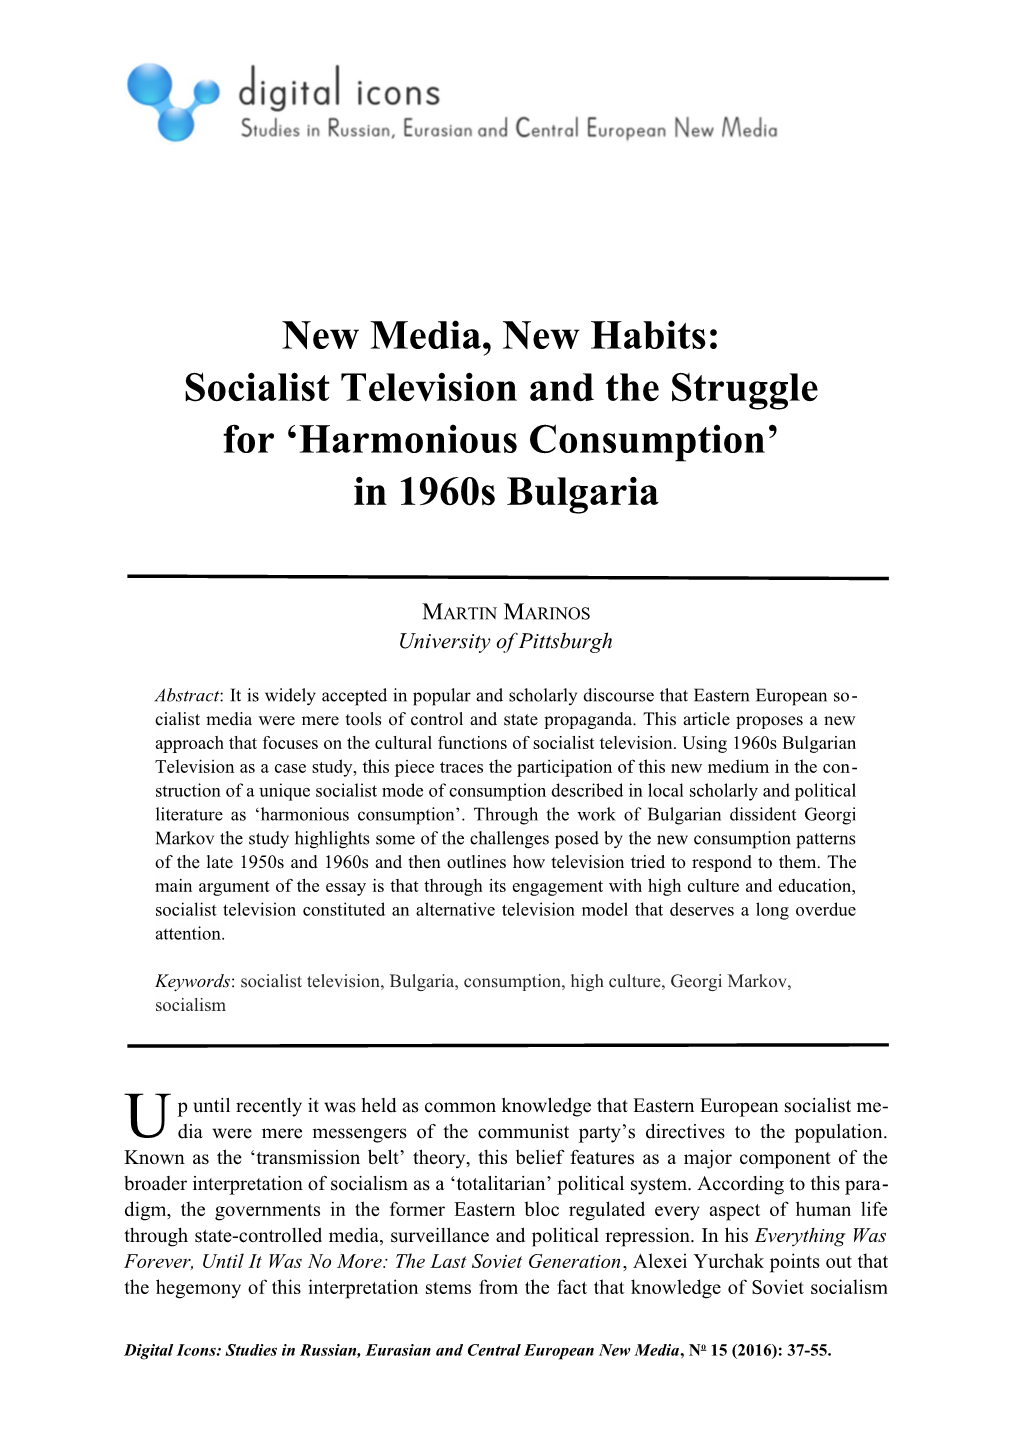 Socialist Television and the Struggle for 'Harmonious Consumption'